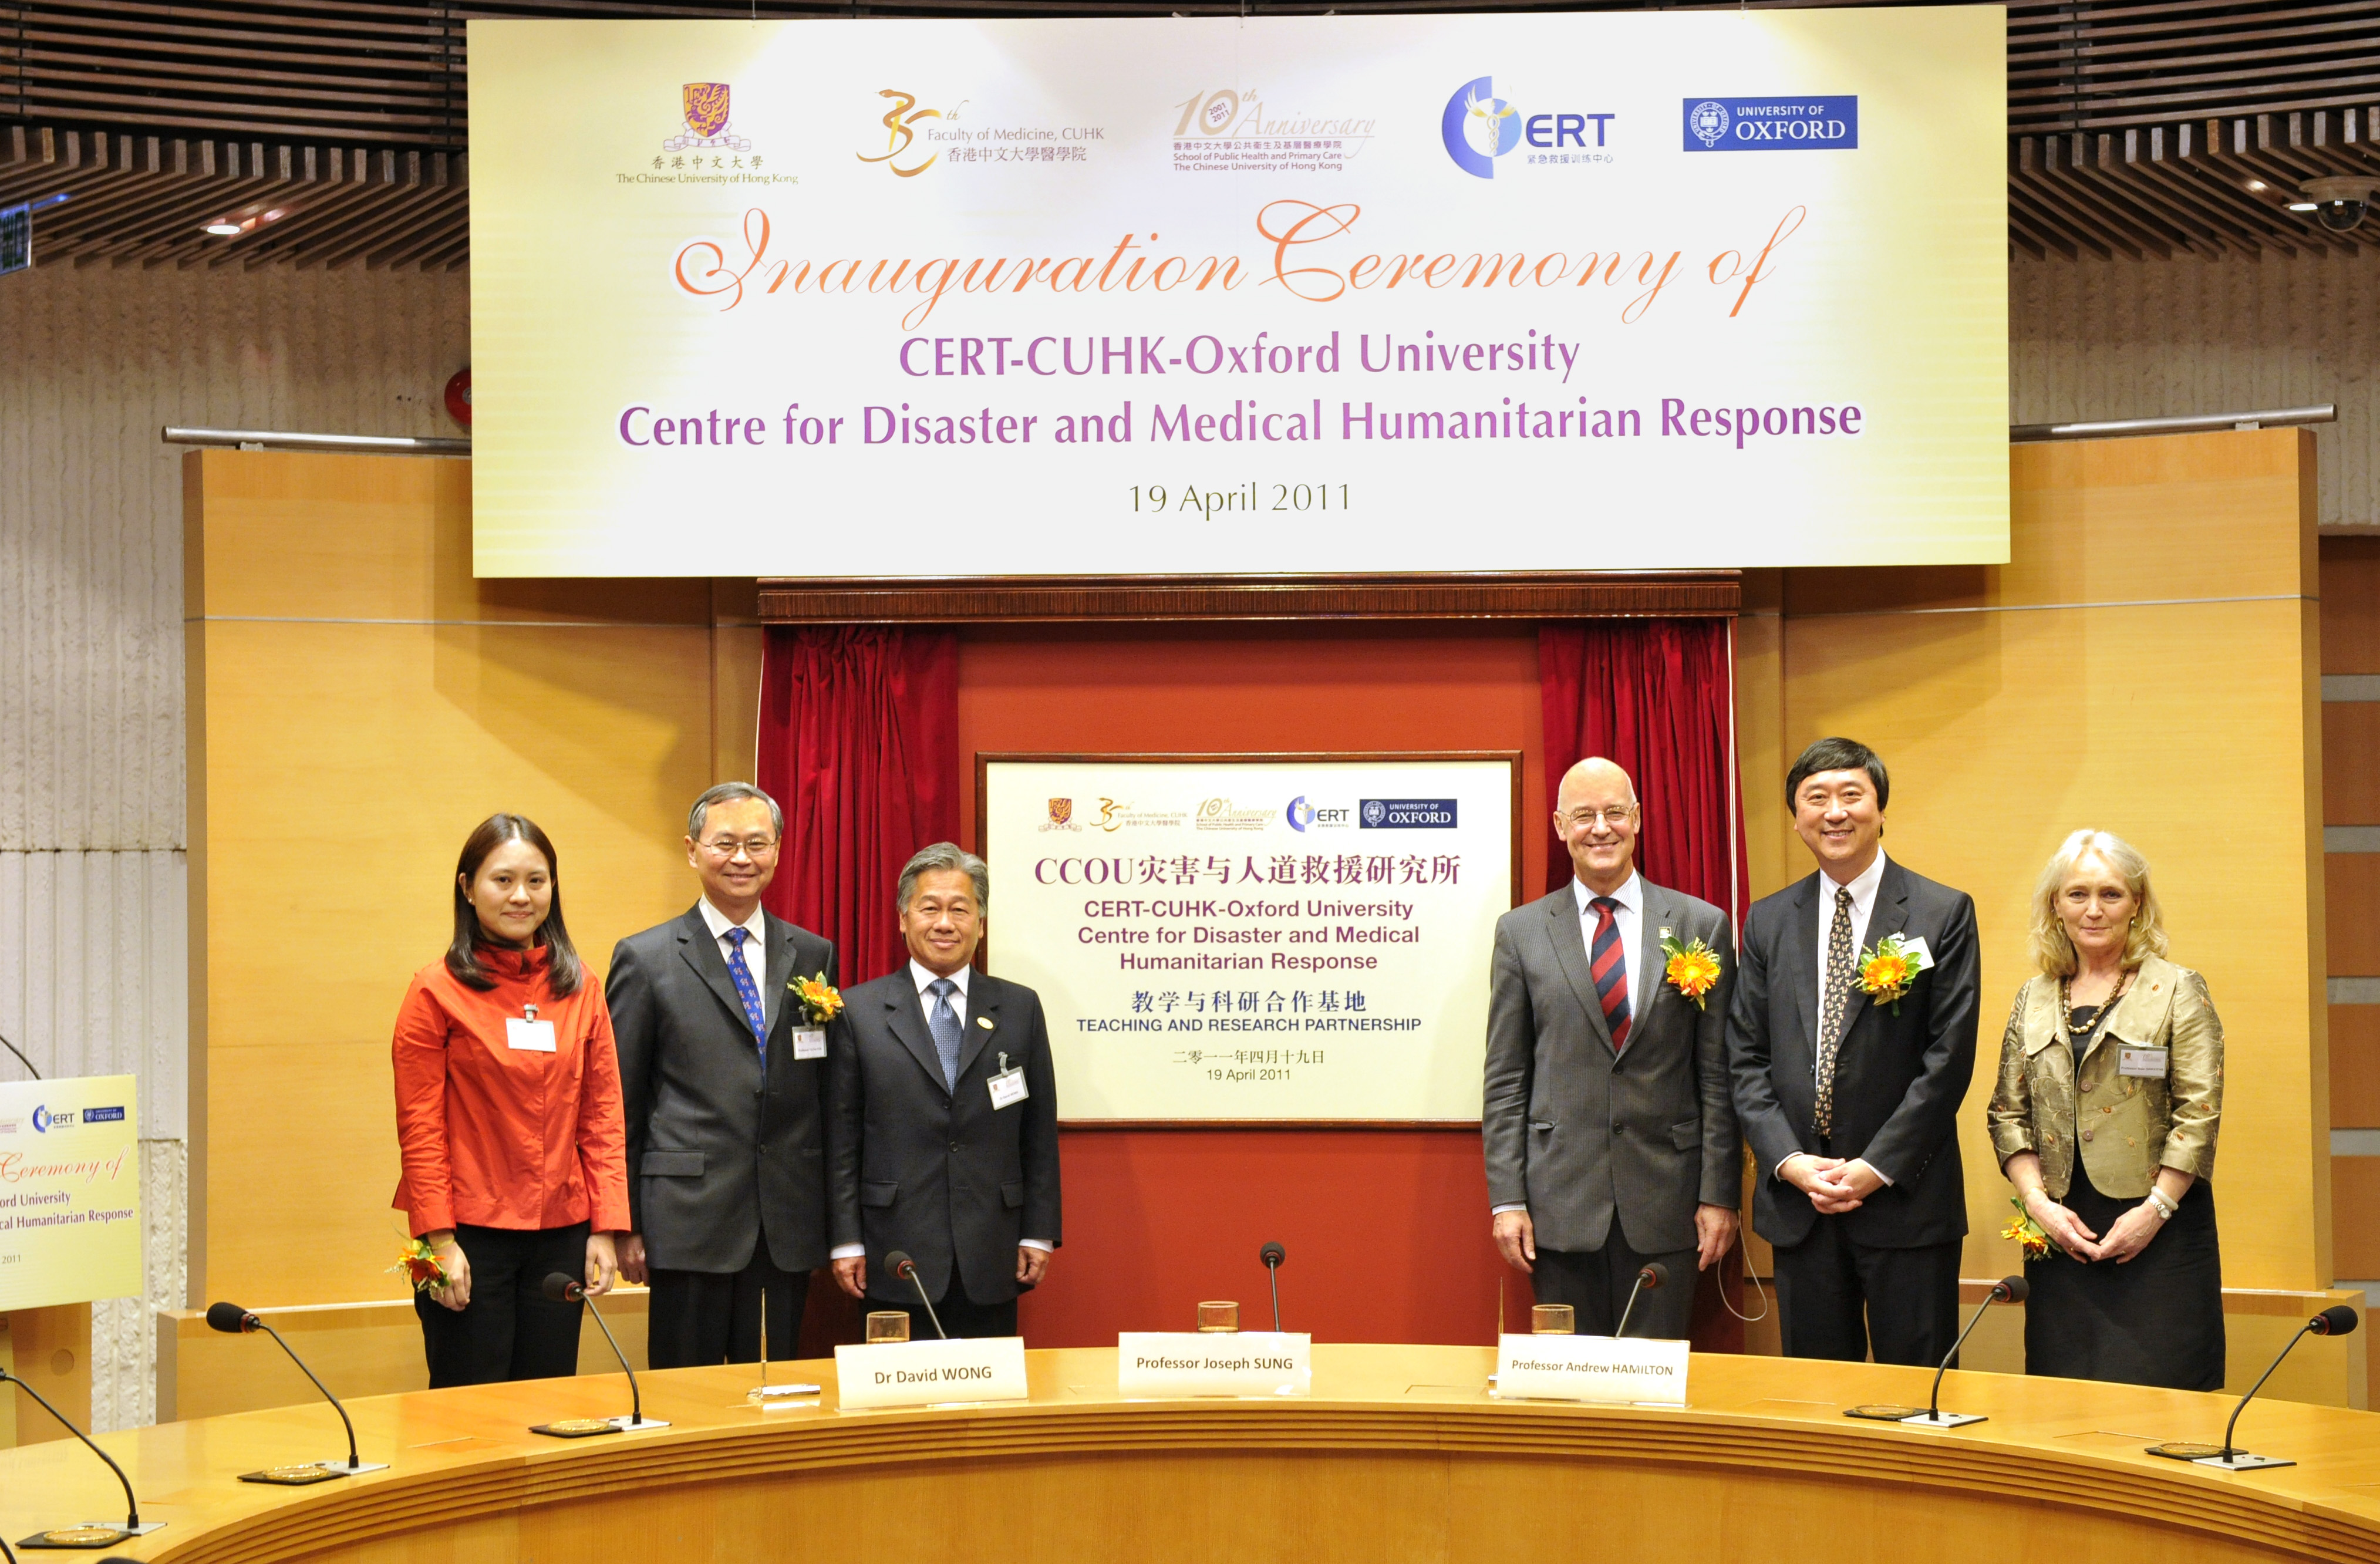 From left: Prof. Emily CHAN, Prof. Tai Fai FOK, Dr. David WONG, Prof. Andrew HAMILTON, Prof. Joseph SUNG and Prof. Sian GRIFFITHS officiate at the unveiling ceremony for CCOUC